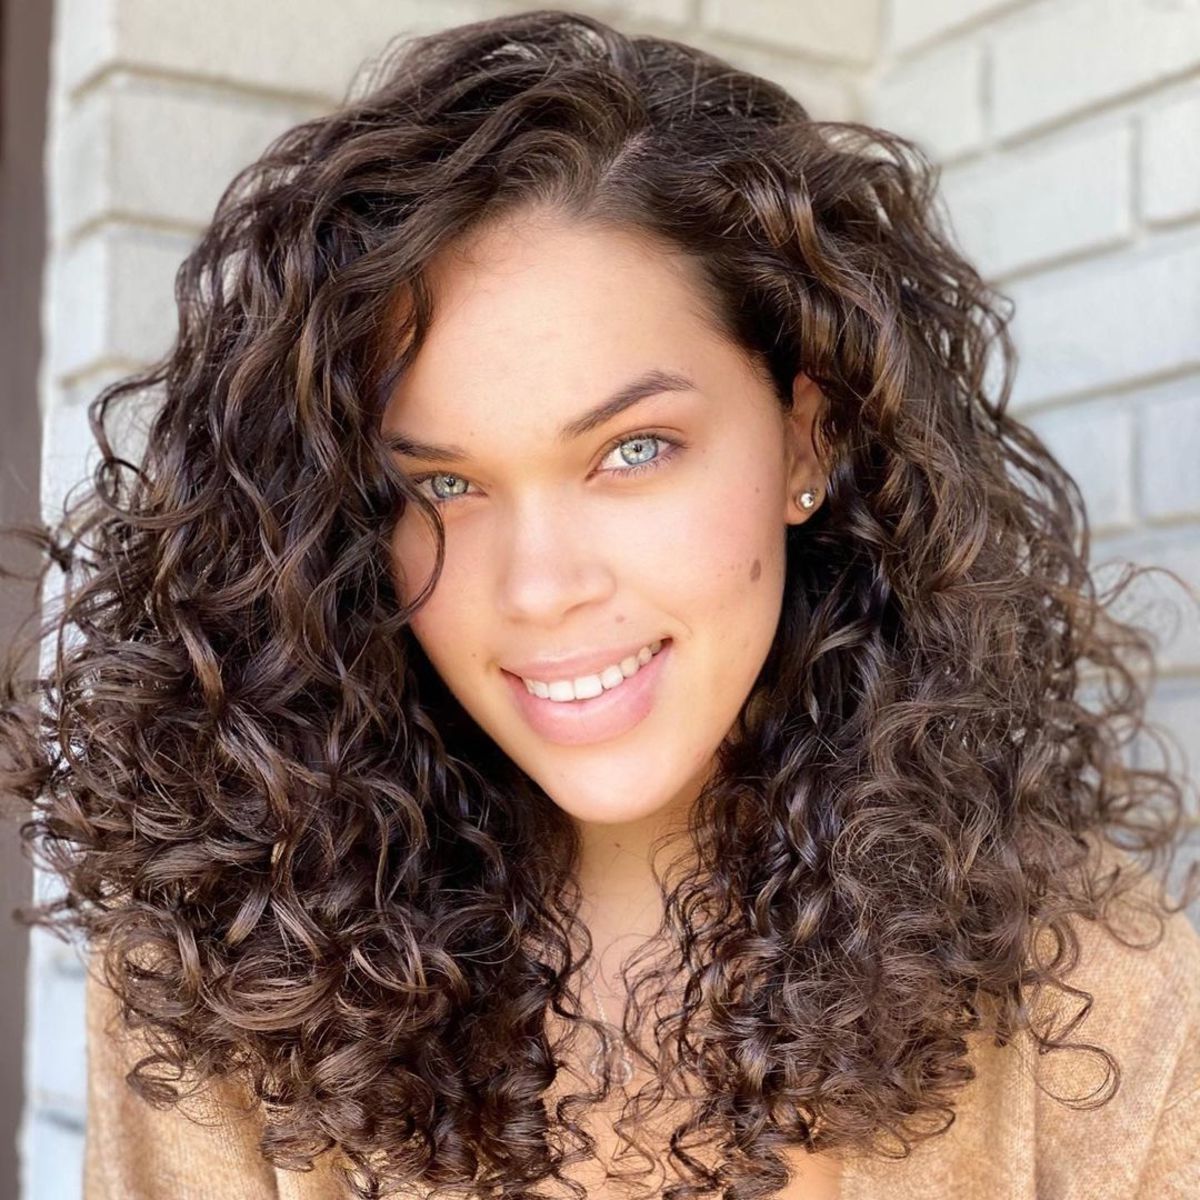 62 Best Shoulder Length Curly Hair Cuts & Styles In 2022 Throughout Current Layered Curly Medium Length Hairstyles (View 4 of 25)